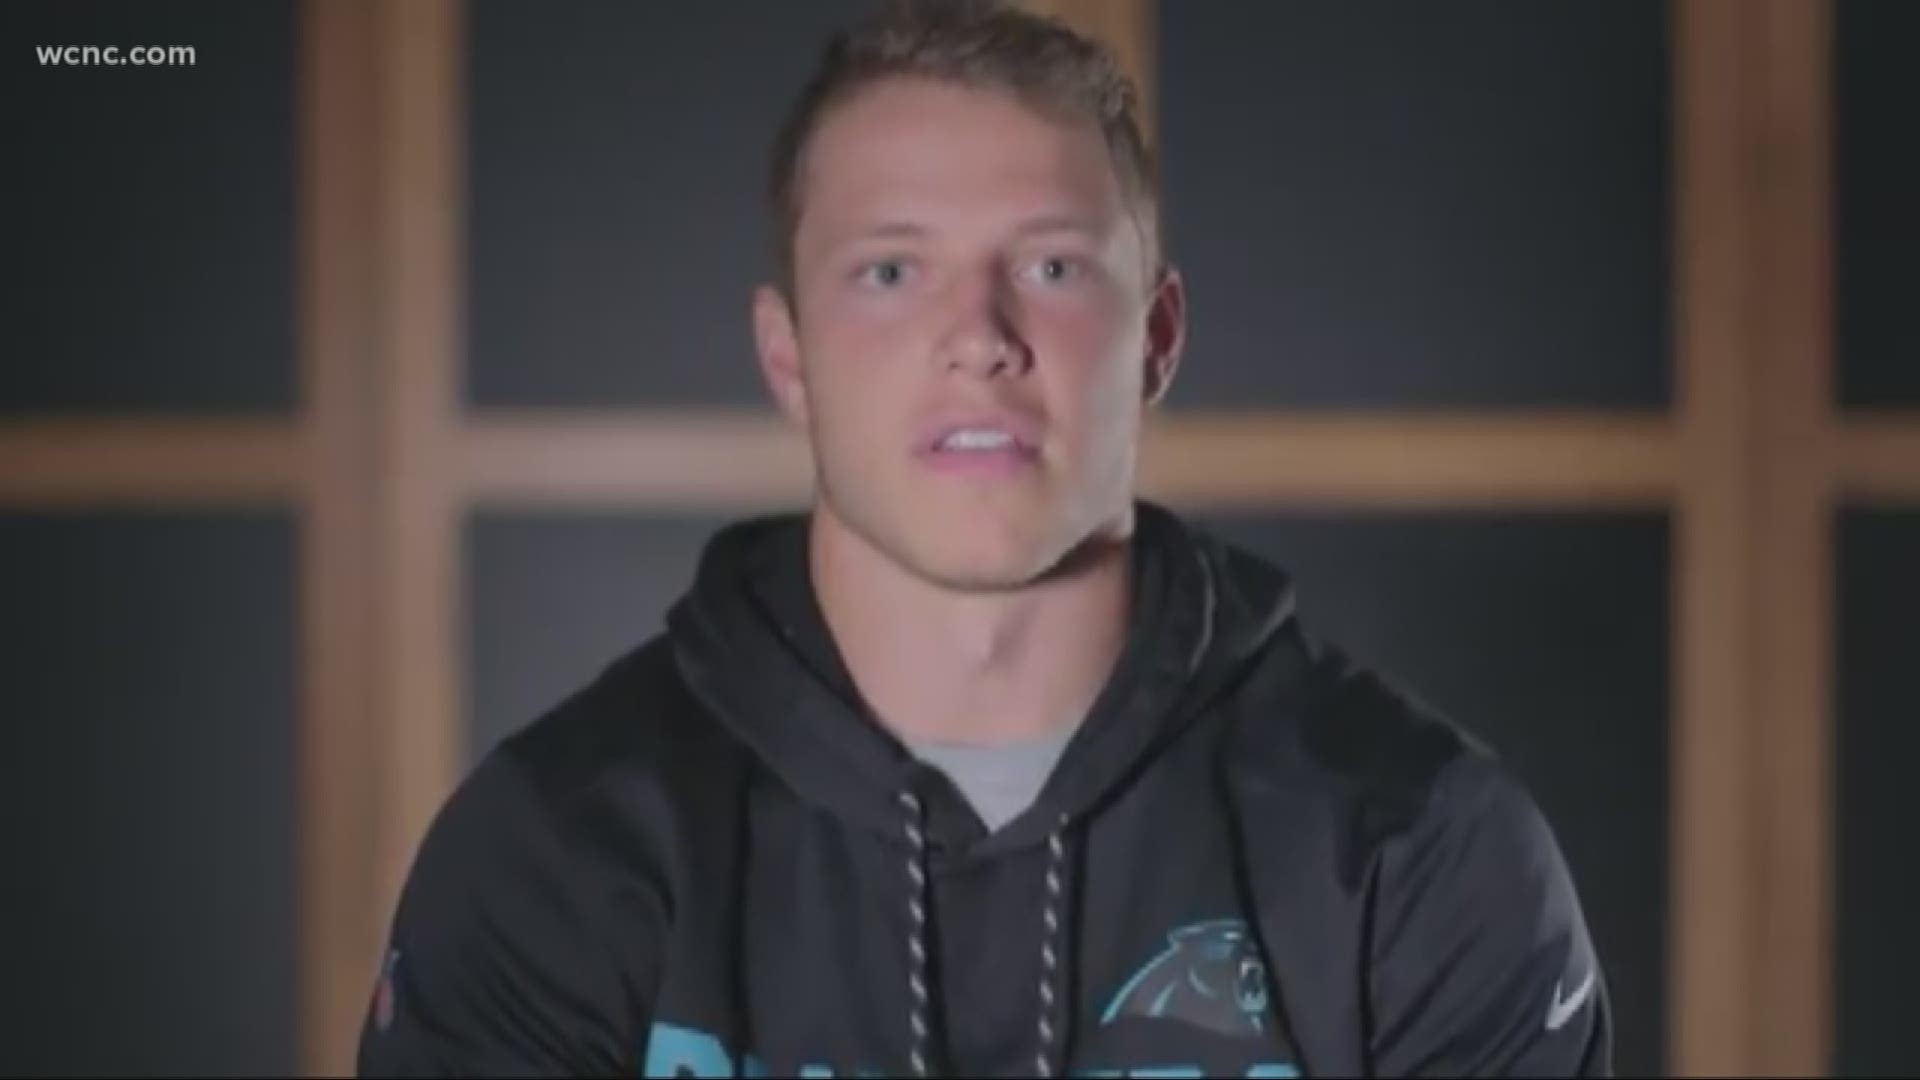 Carolina Panthers running back Christian McCaffrey recalled his role in rescuing an elderly man after a horrific hiking accident back in March 2018.